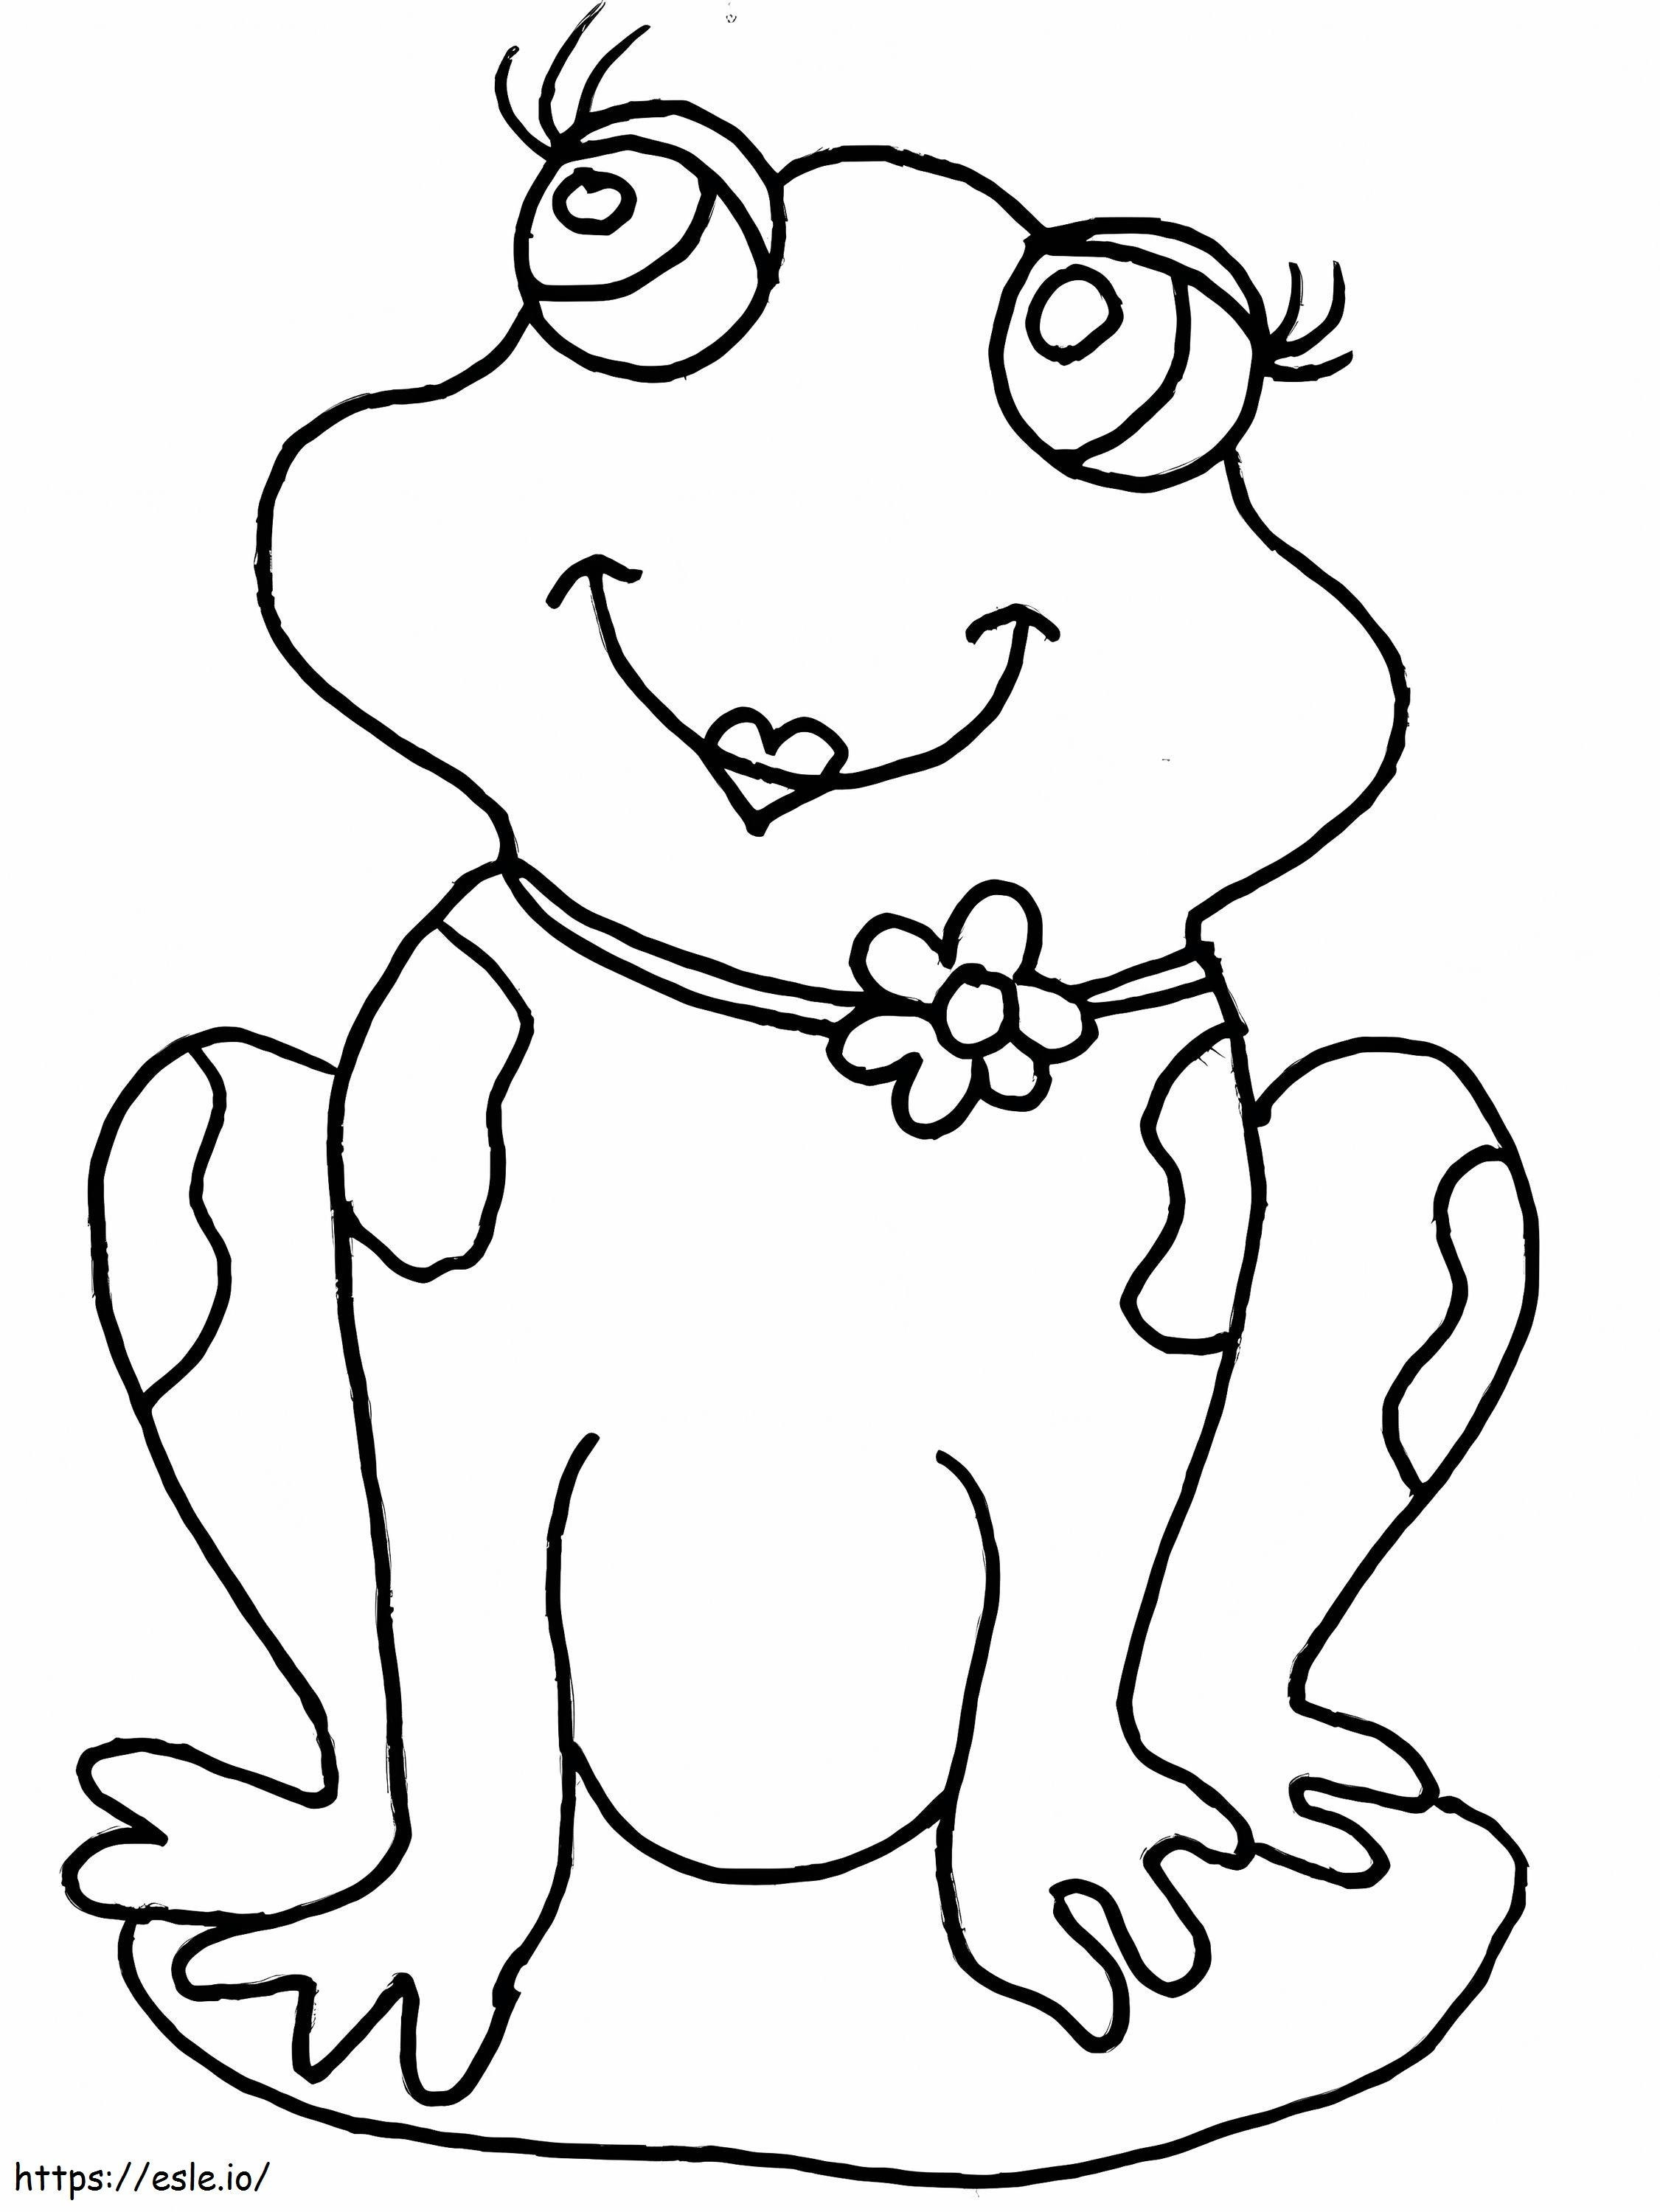 Pretty Frog coloring page